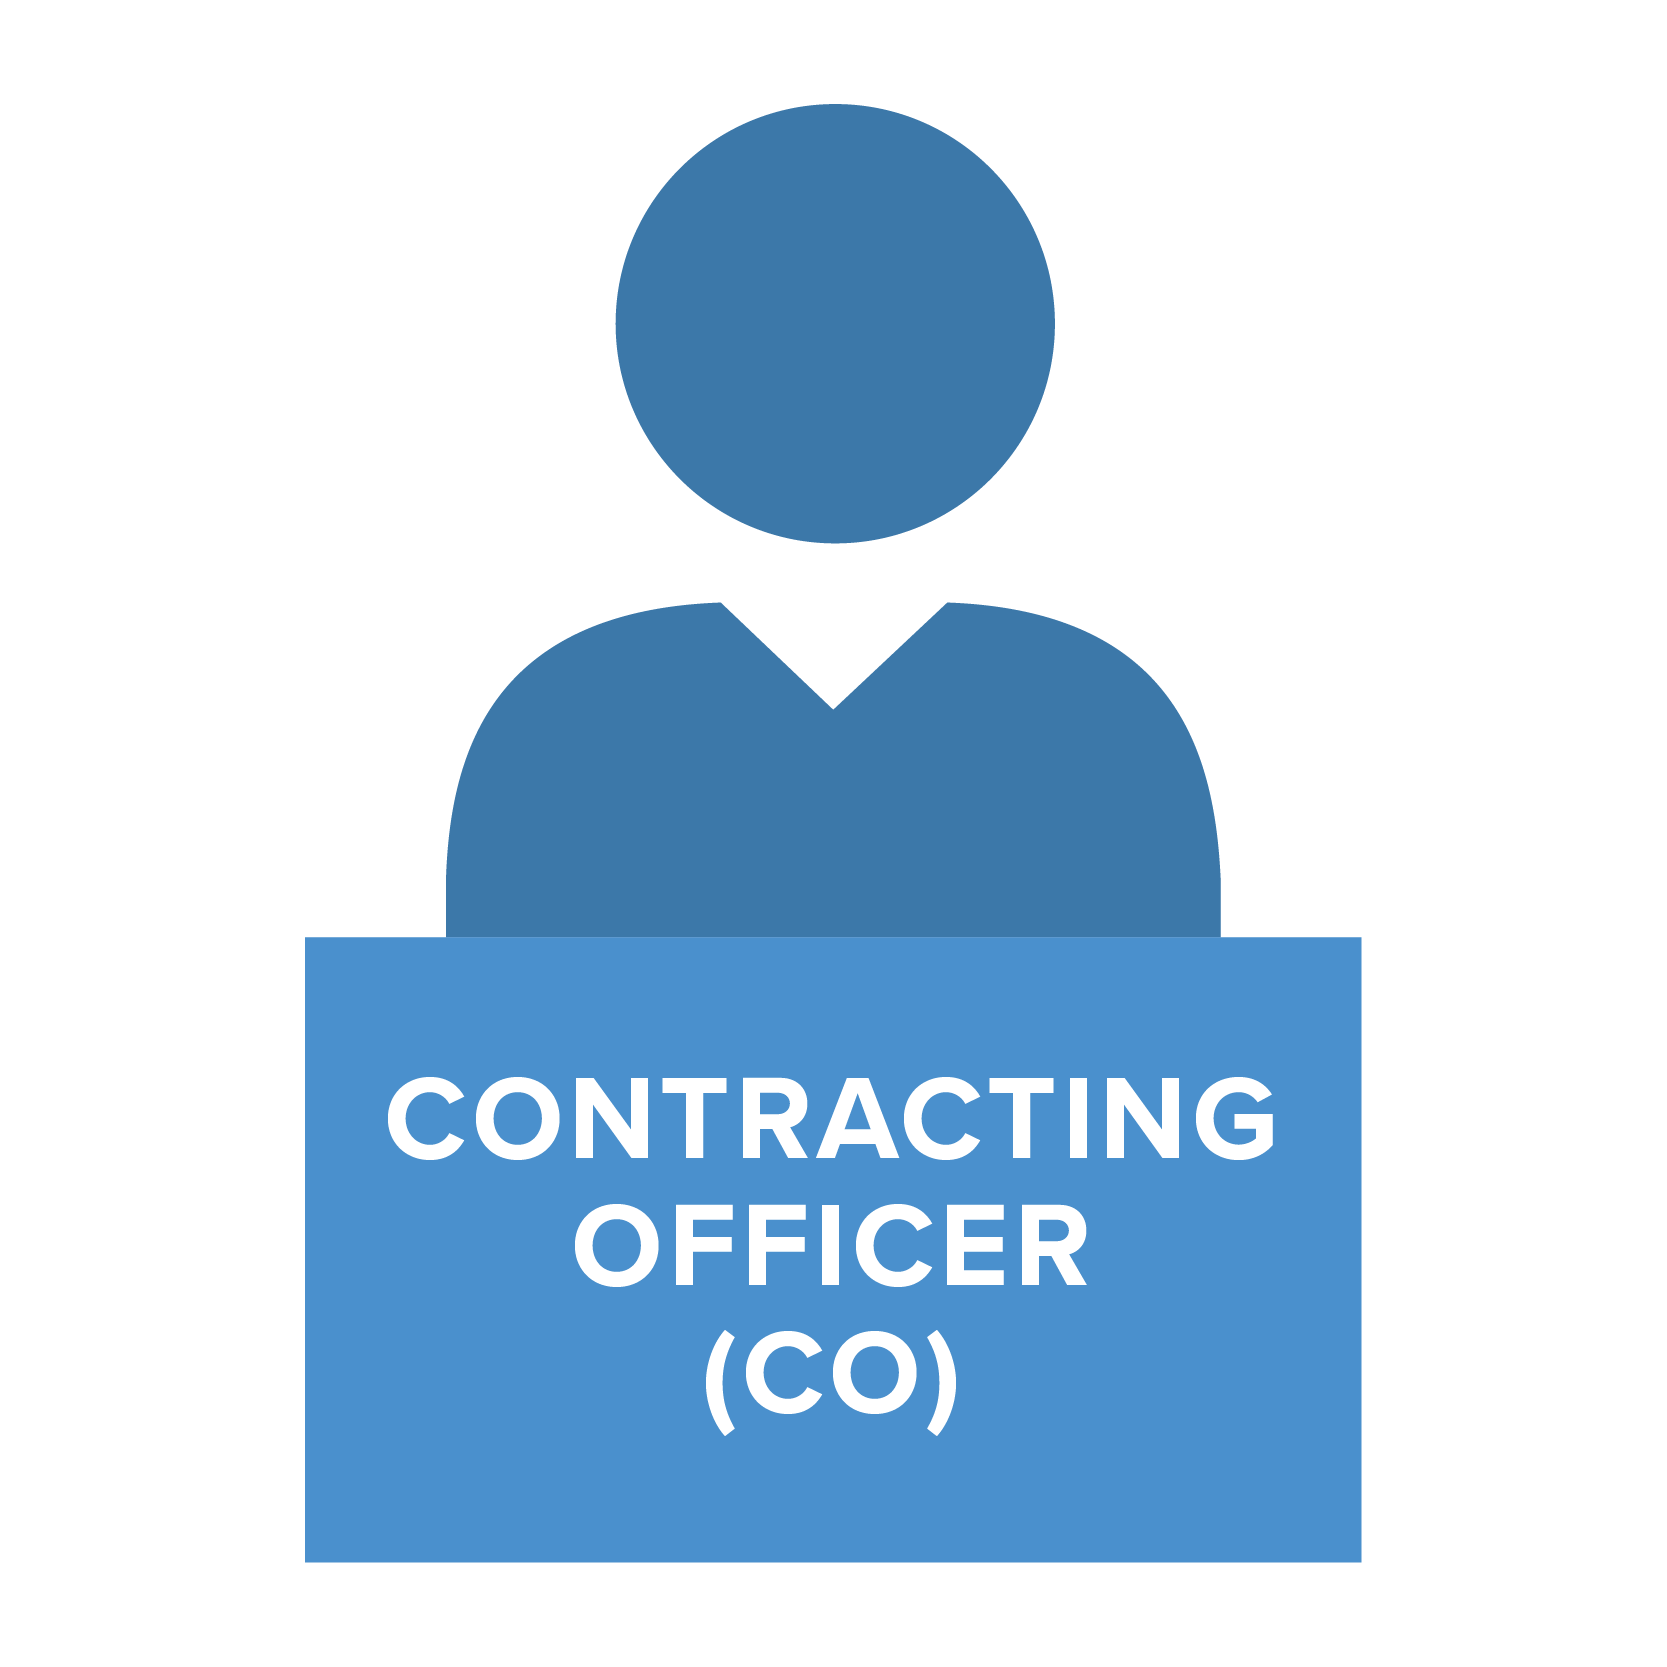 Contracting Officer